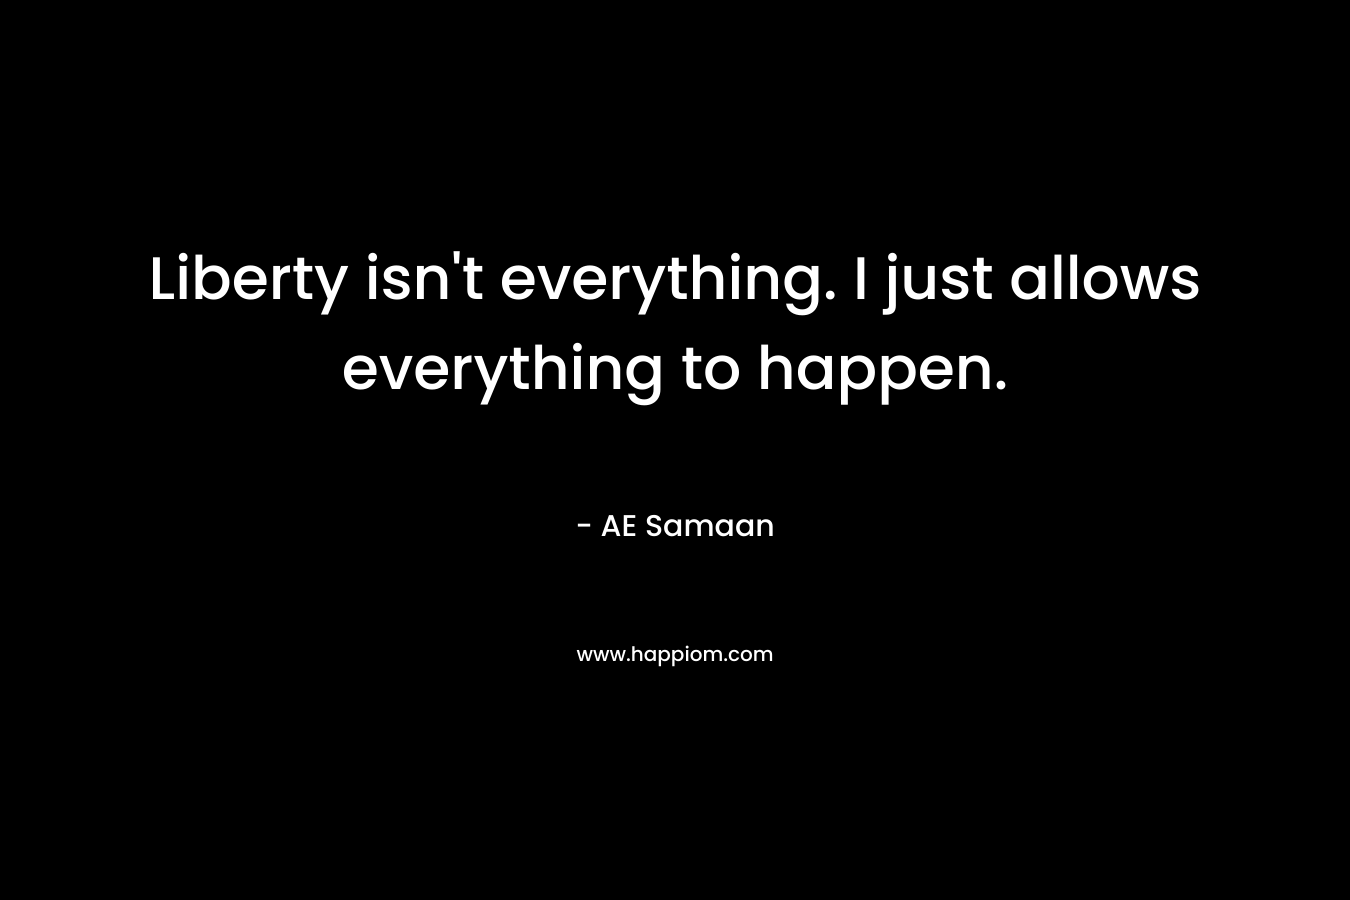 Liberty isn't everything. I just allows everything to happen.